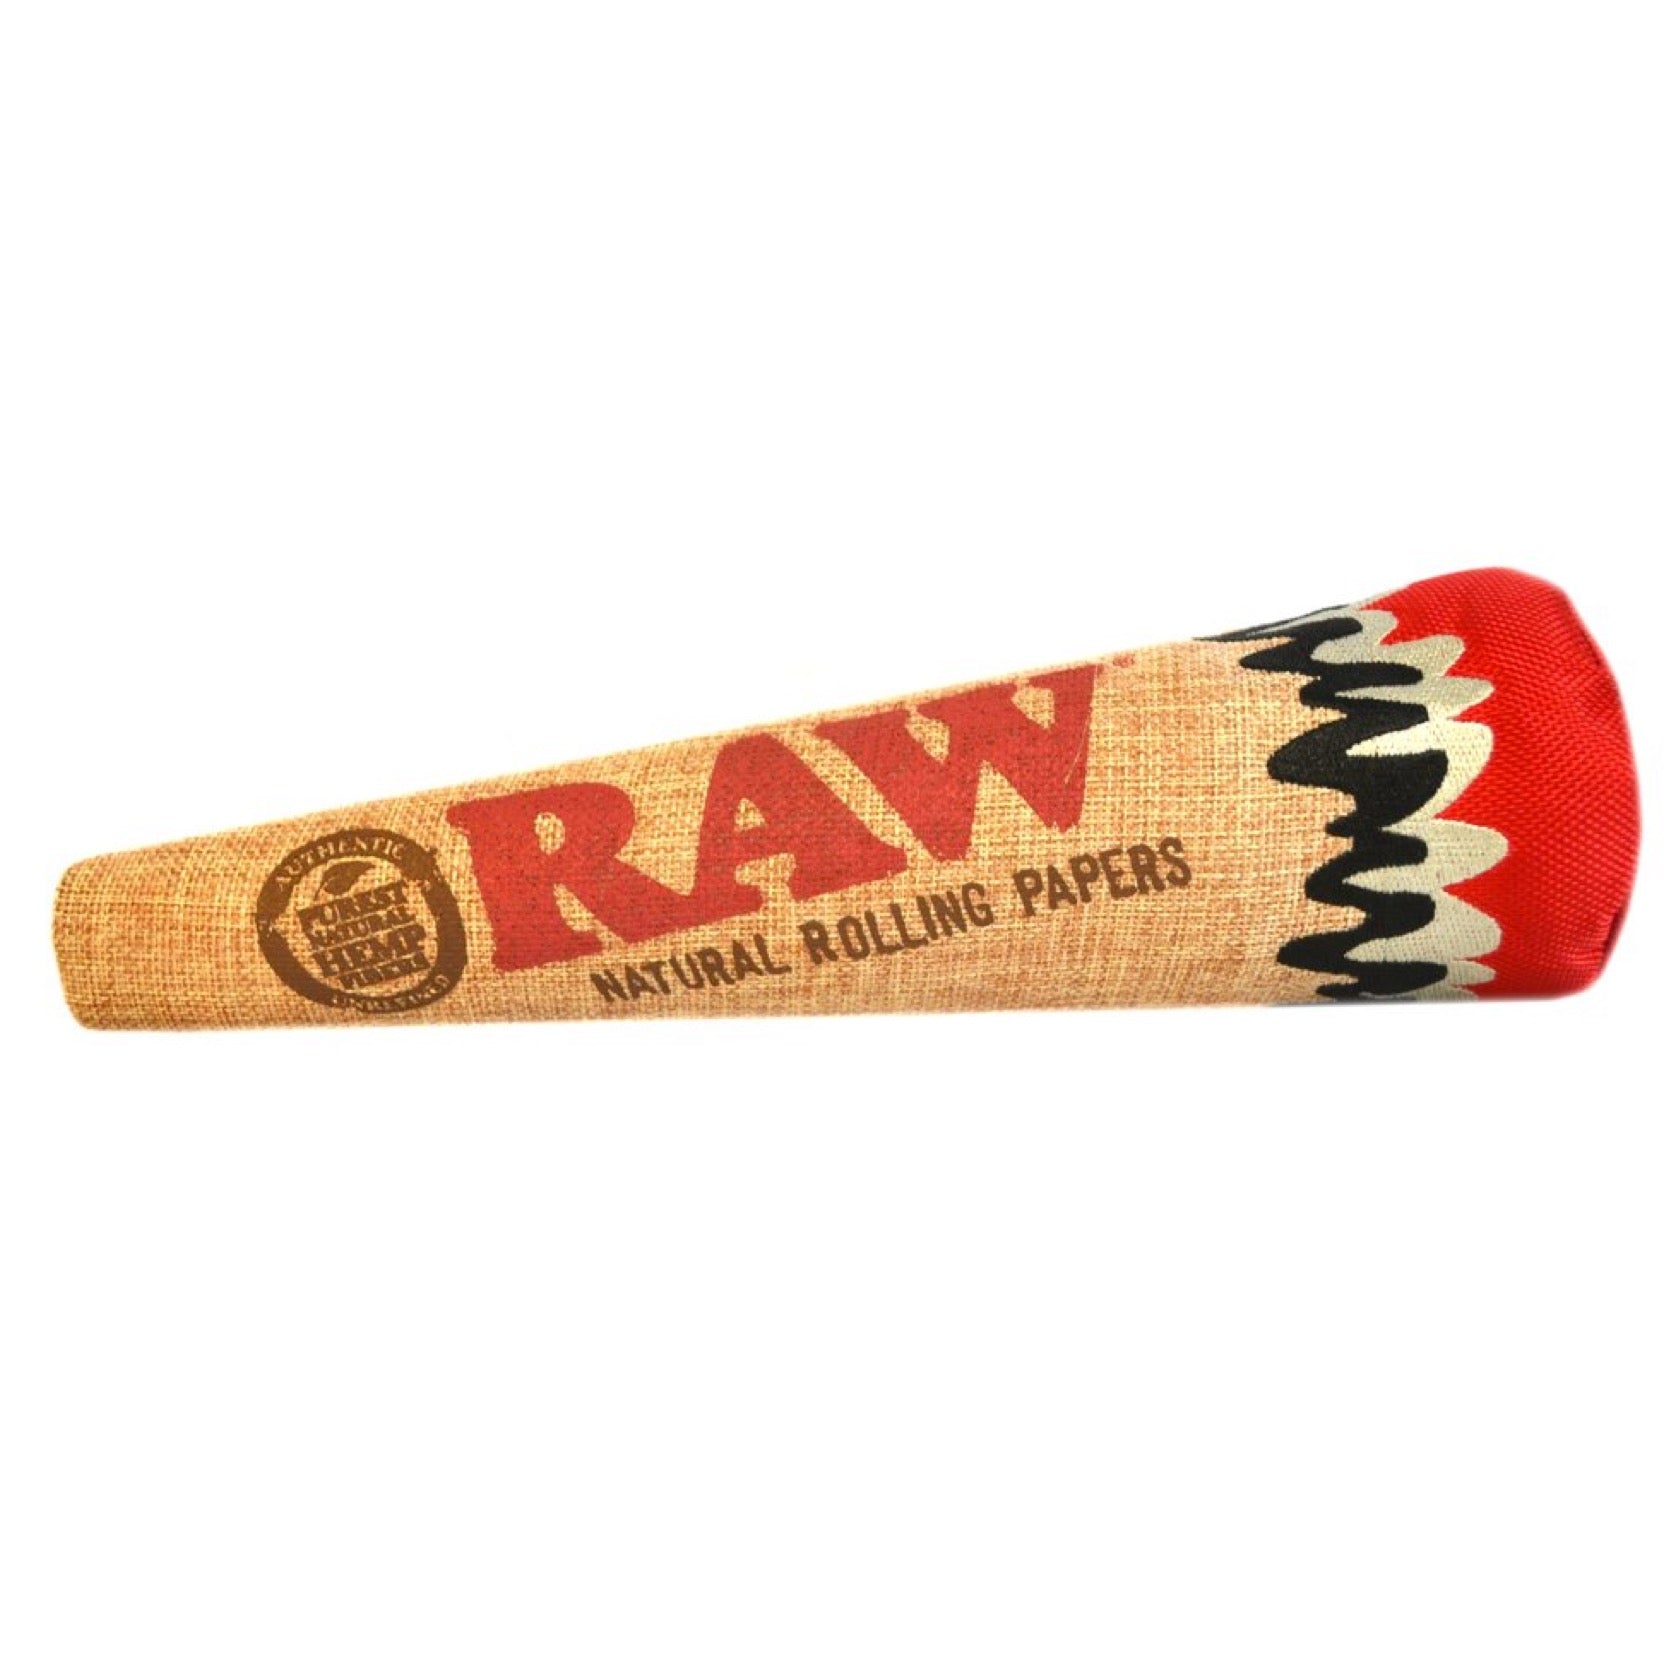 Raw Rolling Papers Hemp Joint Dog Toy